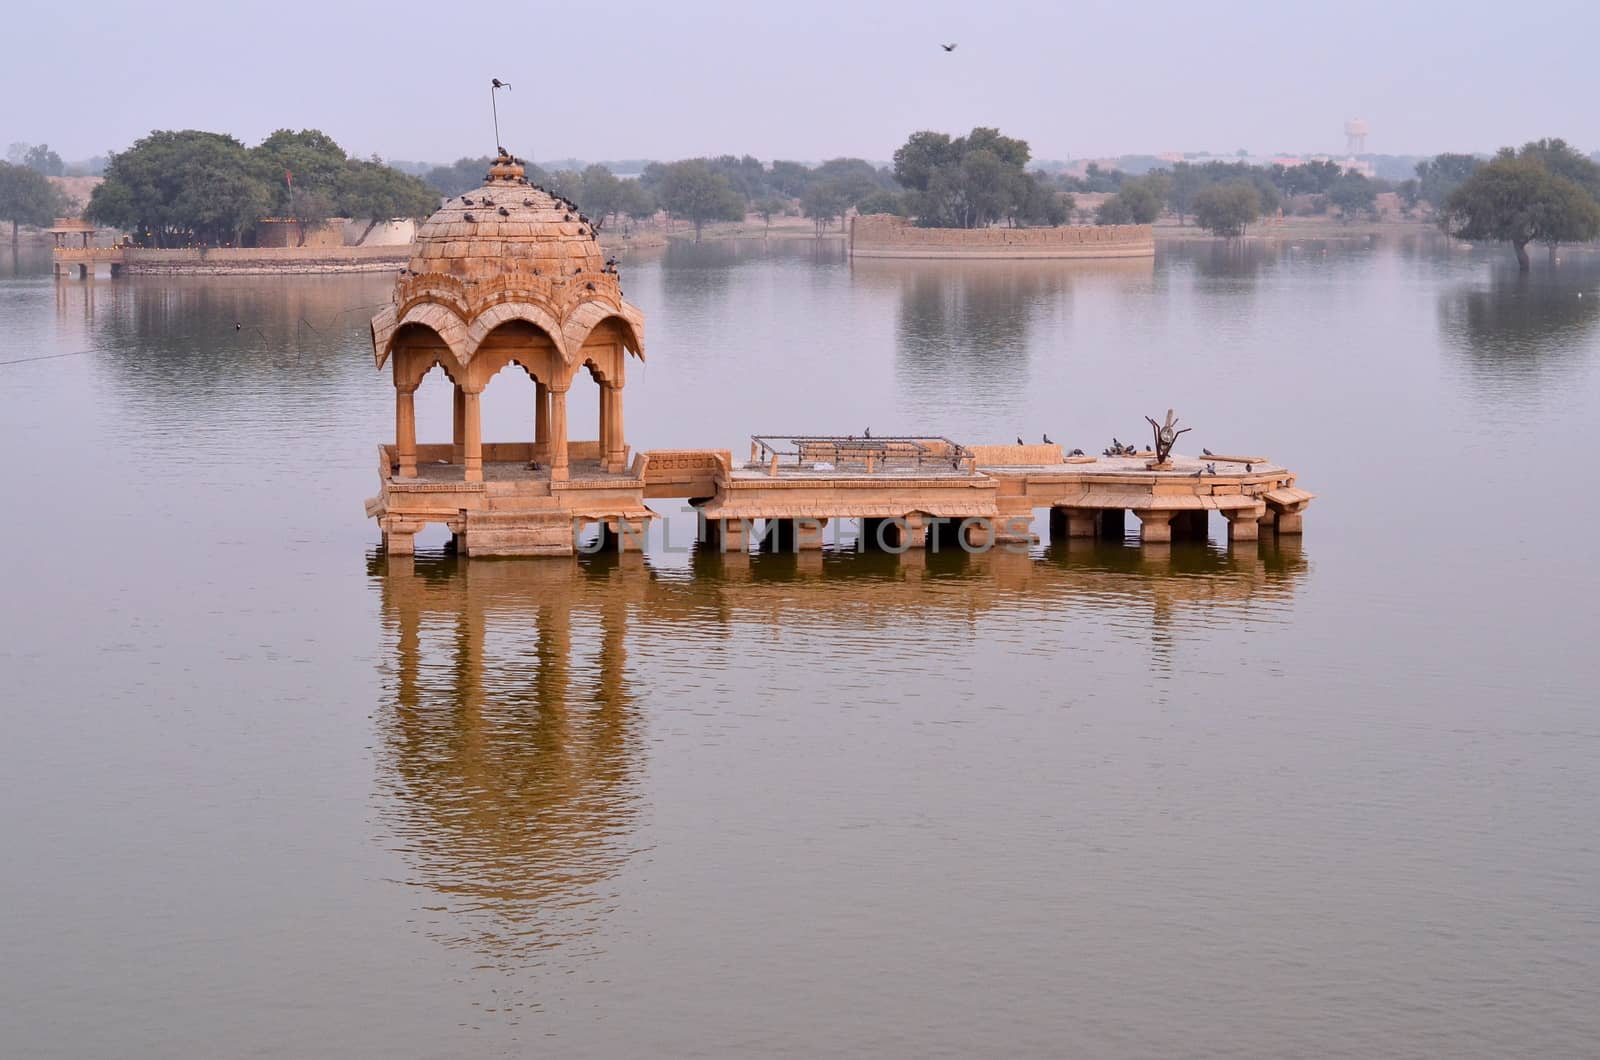 Gadisar Lake in Jaisalmer, Rajasthan, India is an artificial lake built by Raja Rawal Jaisal. Gadi sagar lake is surrounded by artistically carved Sandstone Chattri, Temples, Shrines and ghats. by jayantbahel